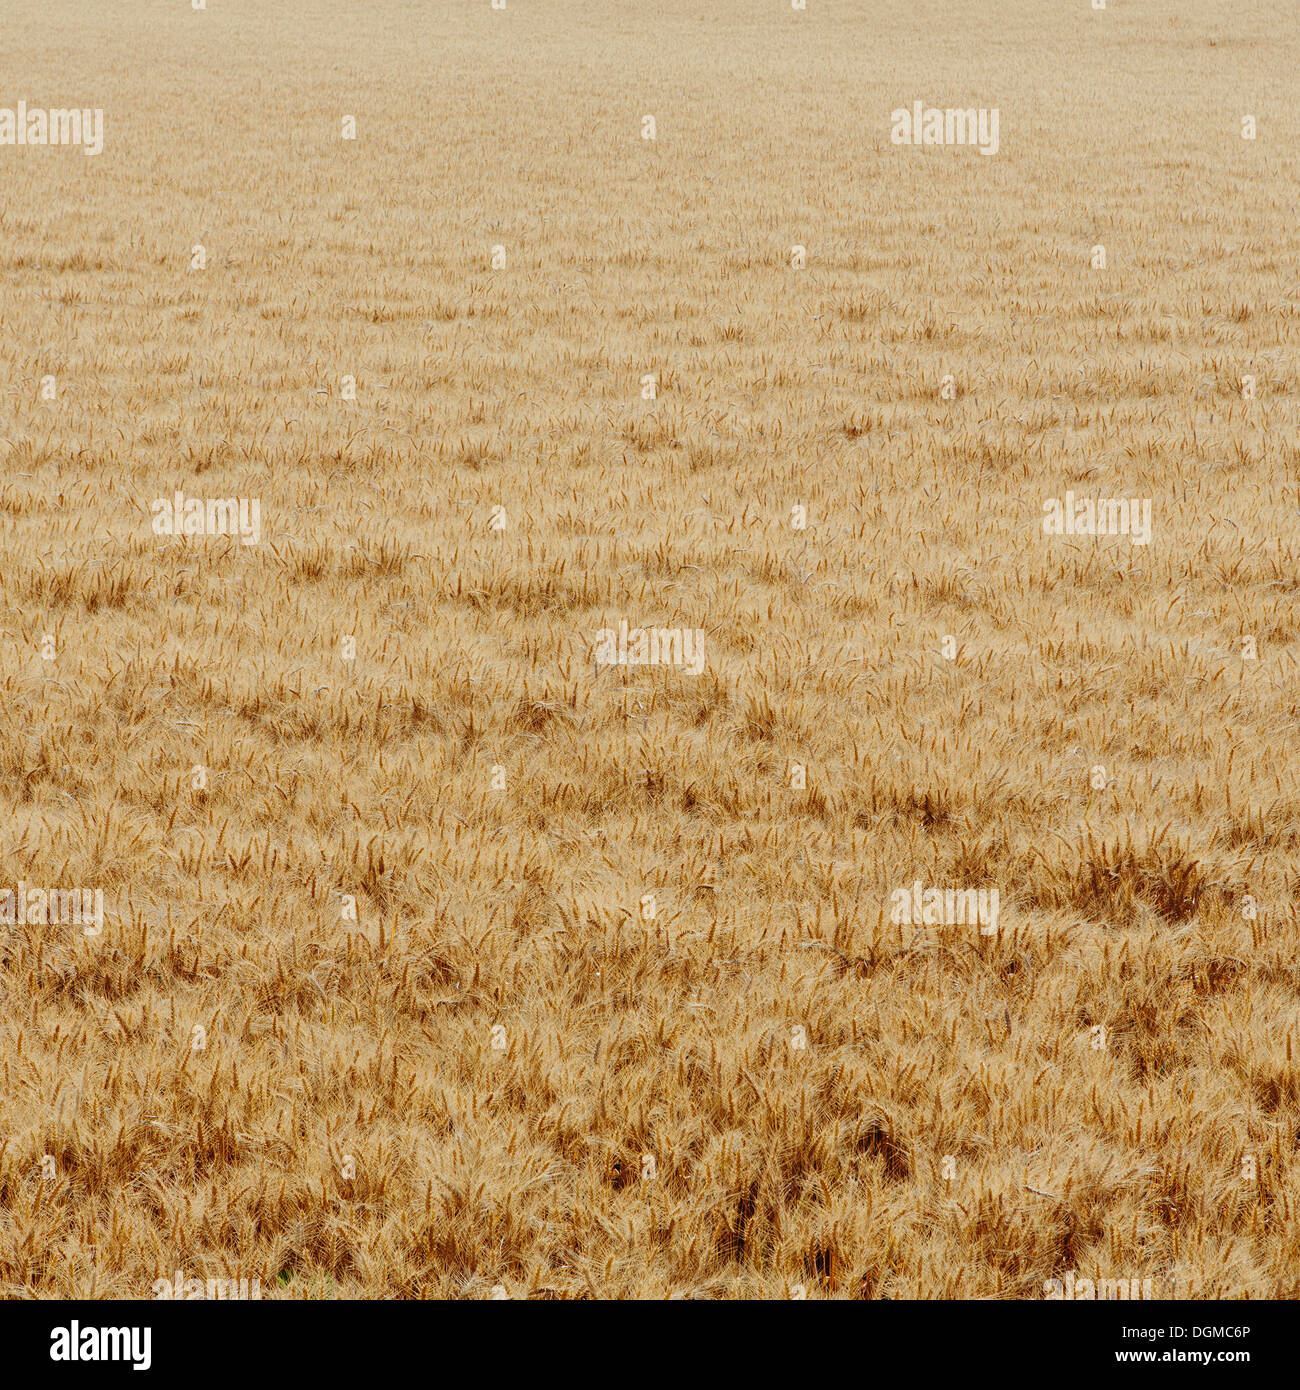 A wheat field with a ripening crop of wheat growing. Wind blowing over the top of the crops. Stock Photo